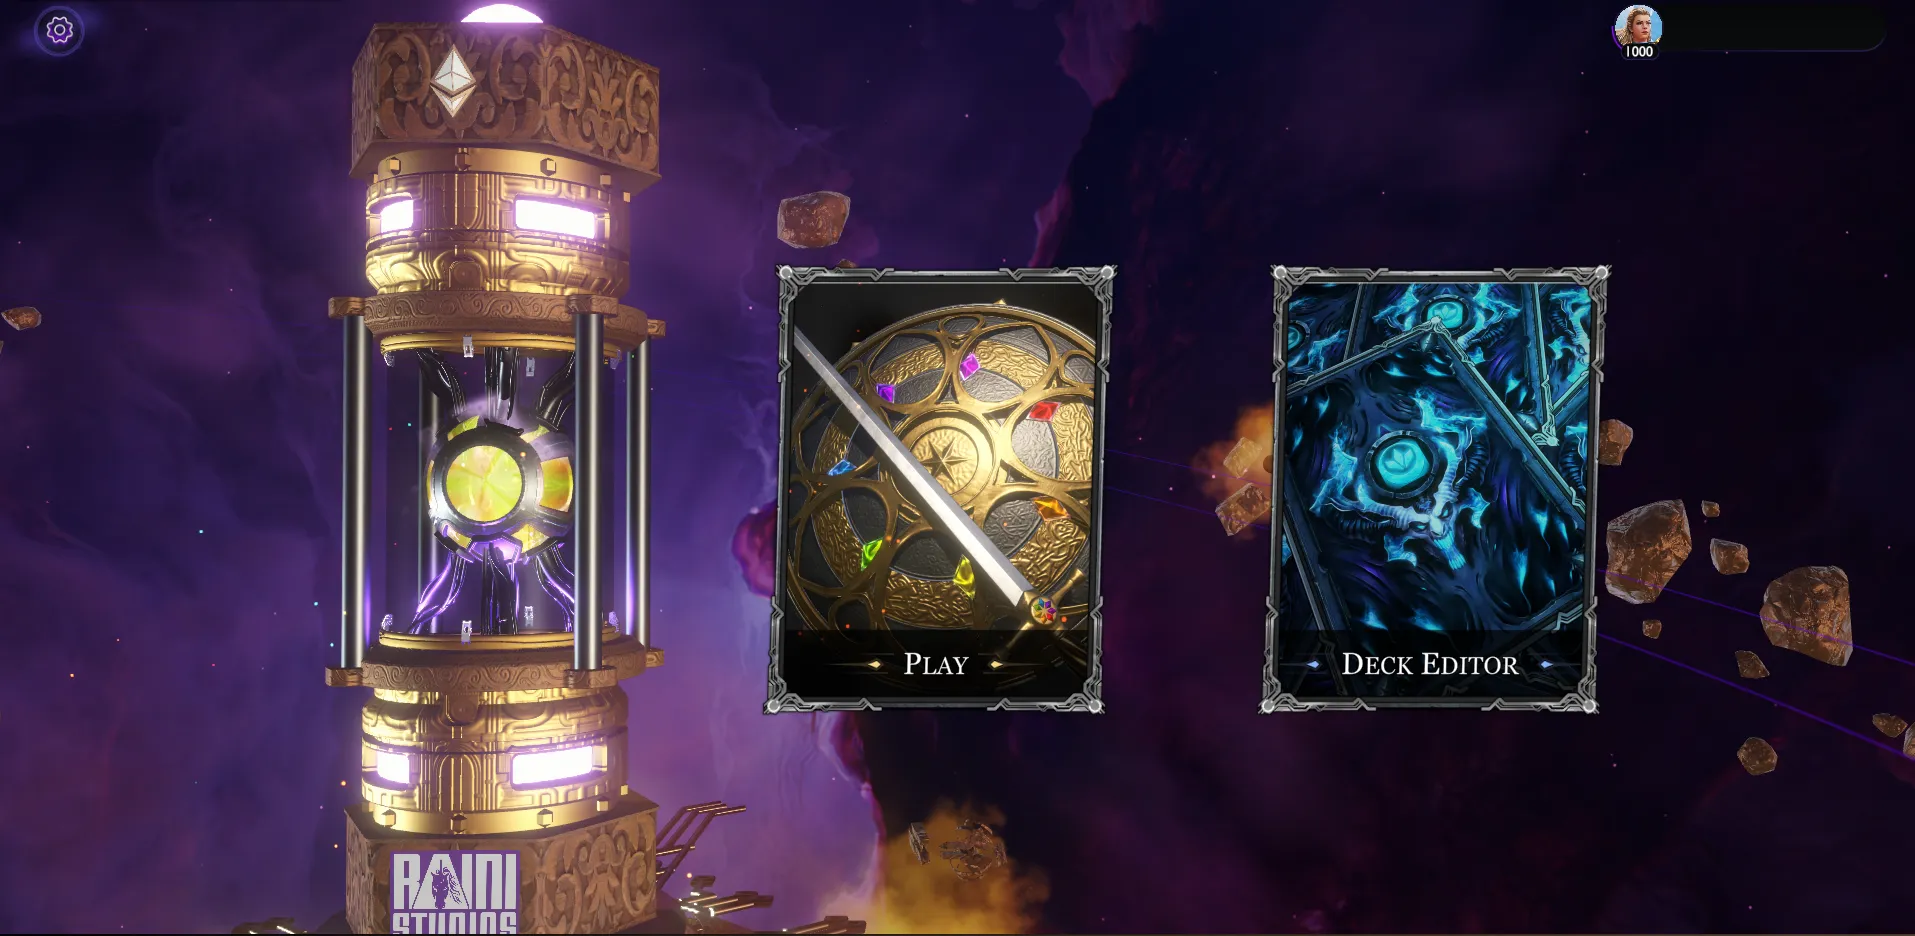 The Raini The Lords of Light homescreen serves as the lobby when opening the game, providing two options: playing the game or editing the deck before battling.